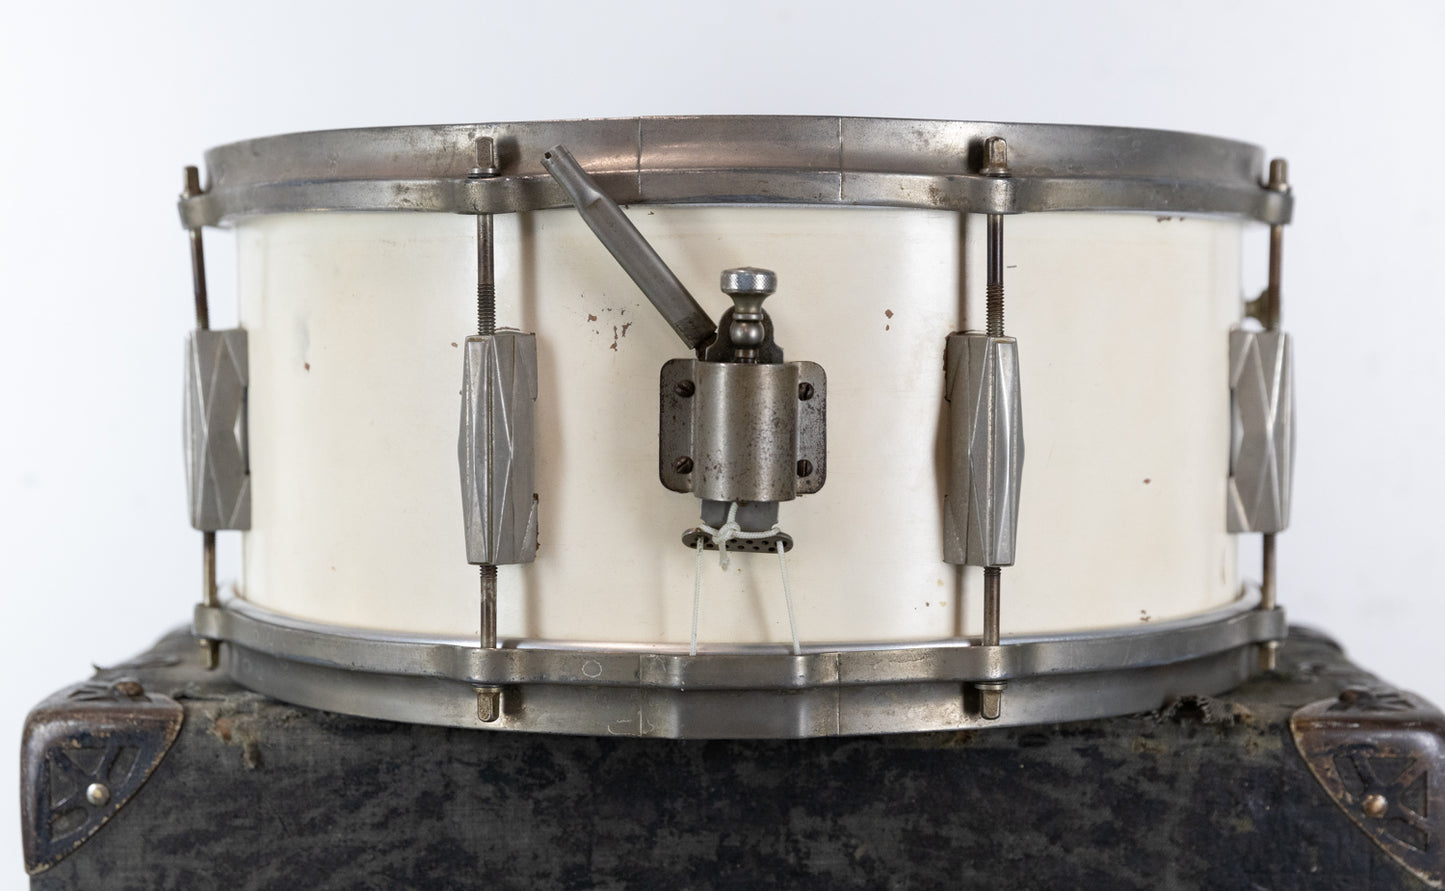 1948 Gretsch 6.5x14 Broadkaster "Duco-White" Snare Drum